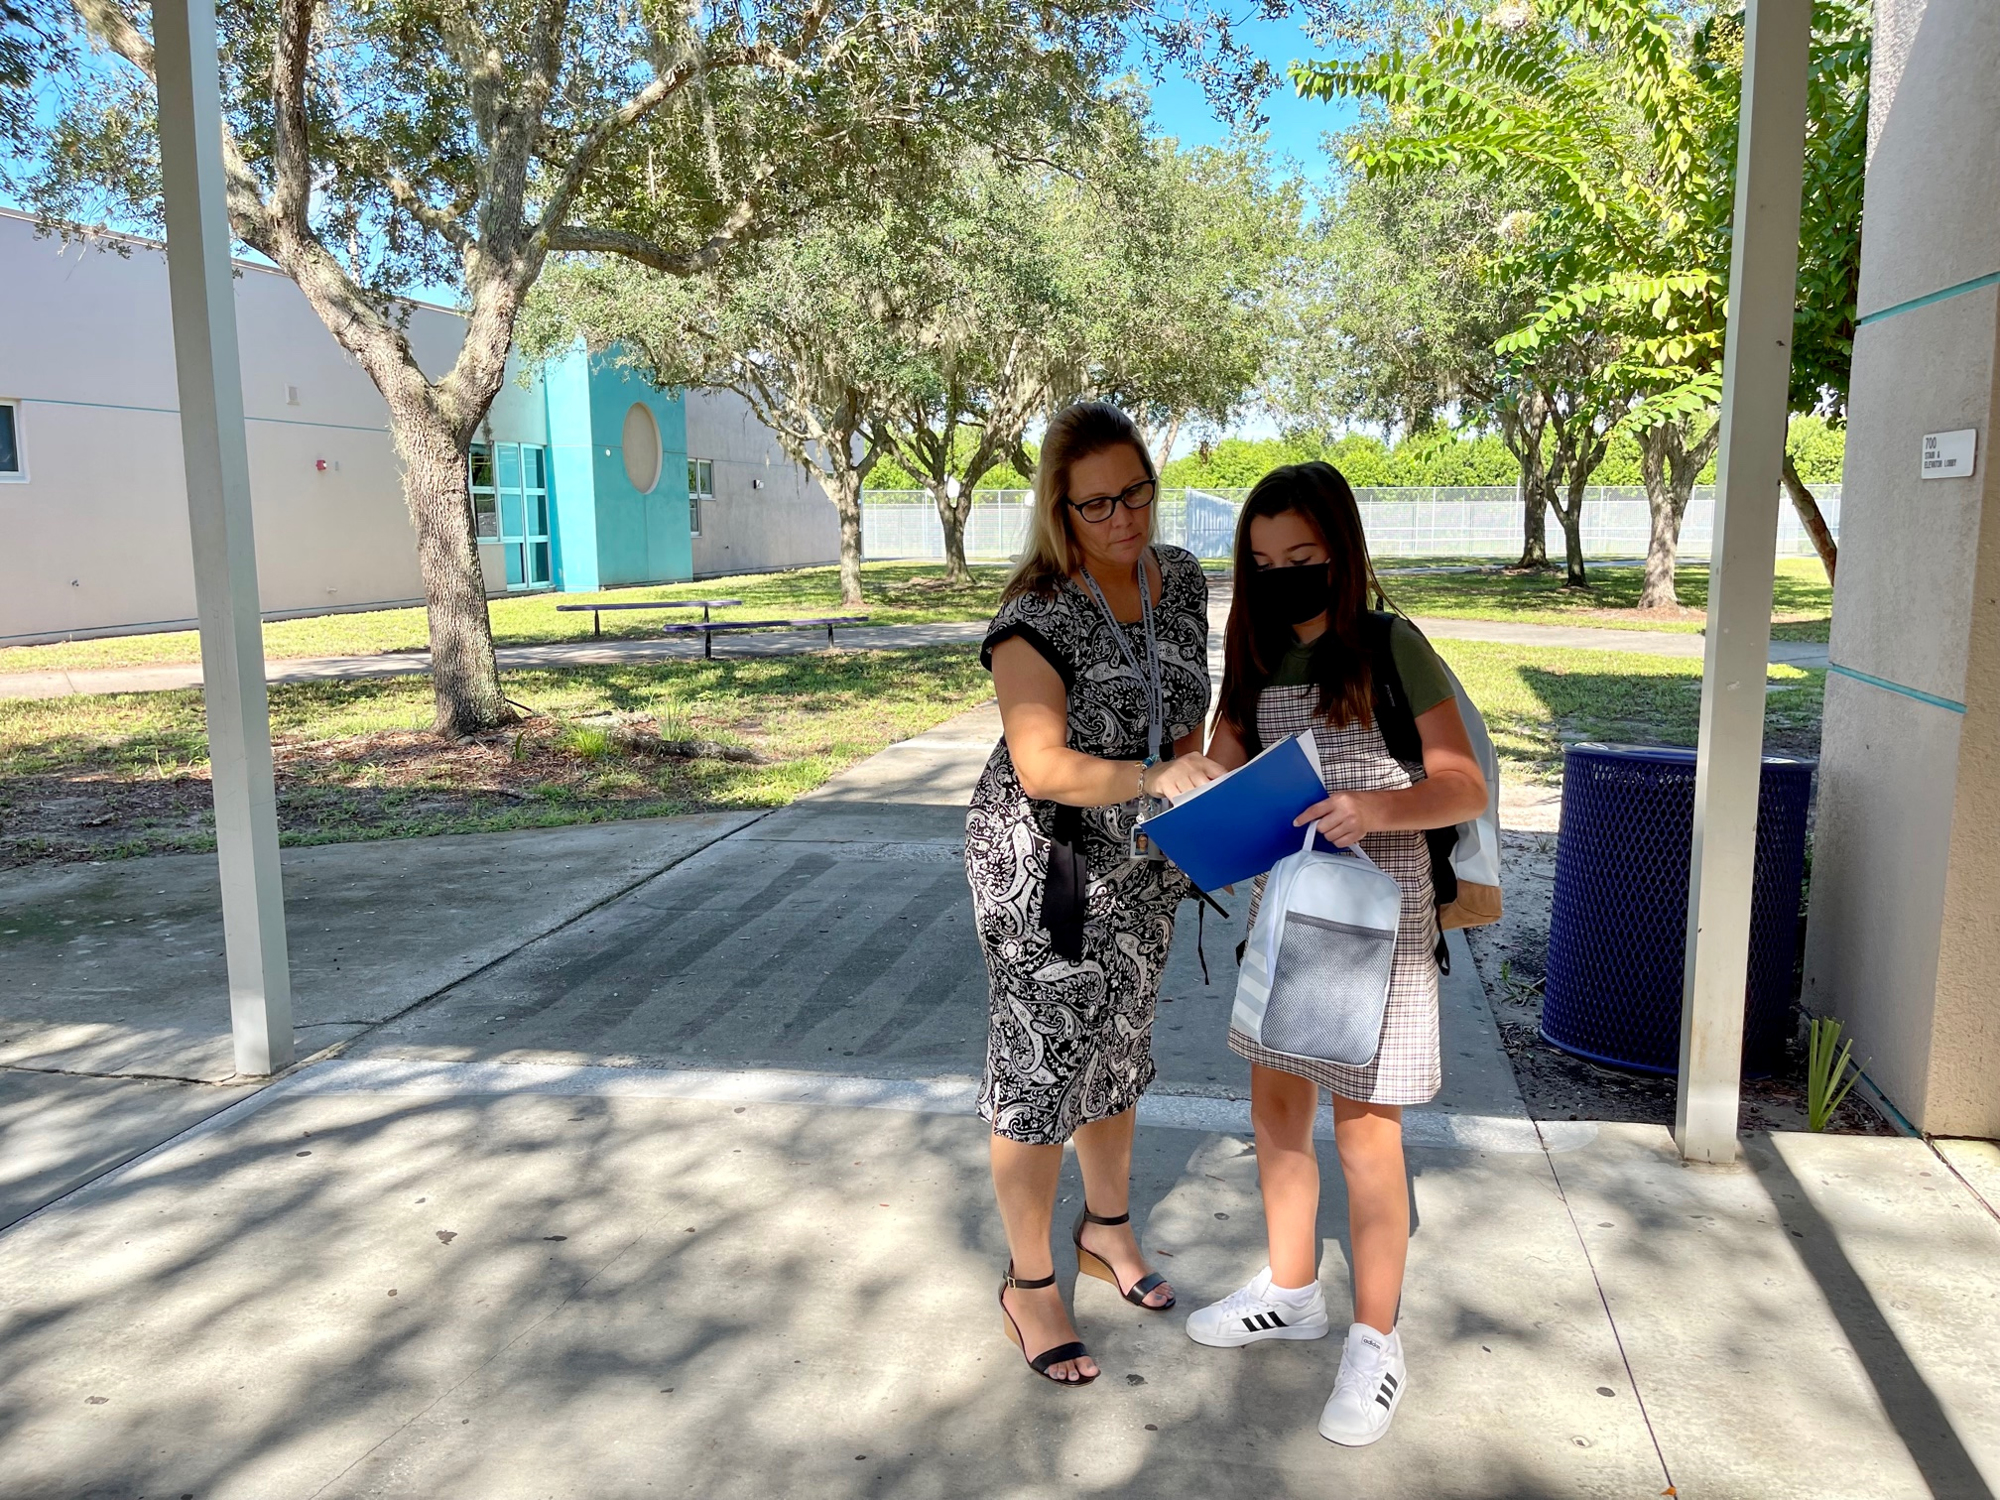 Kate Barlaug, the principal of Carlos E. Haile Middle School, helps a student navigate her way around campus. Photo courtesy of the School District of Manatee County.